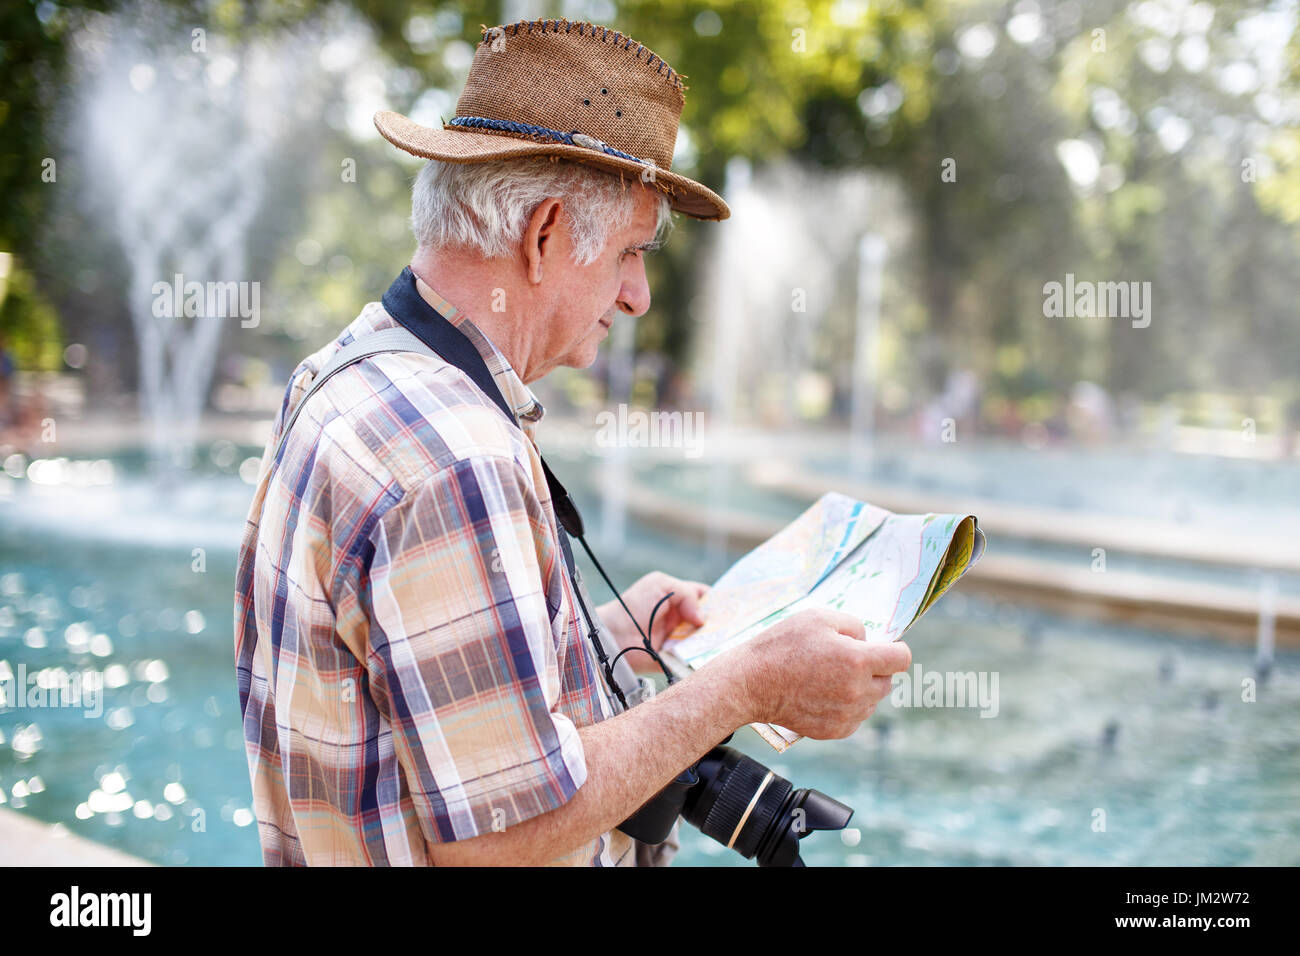 Pensioner tourist in hat searching for destination on map in park with fountains Stock Photo